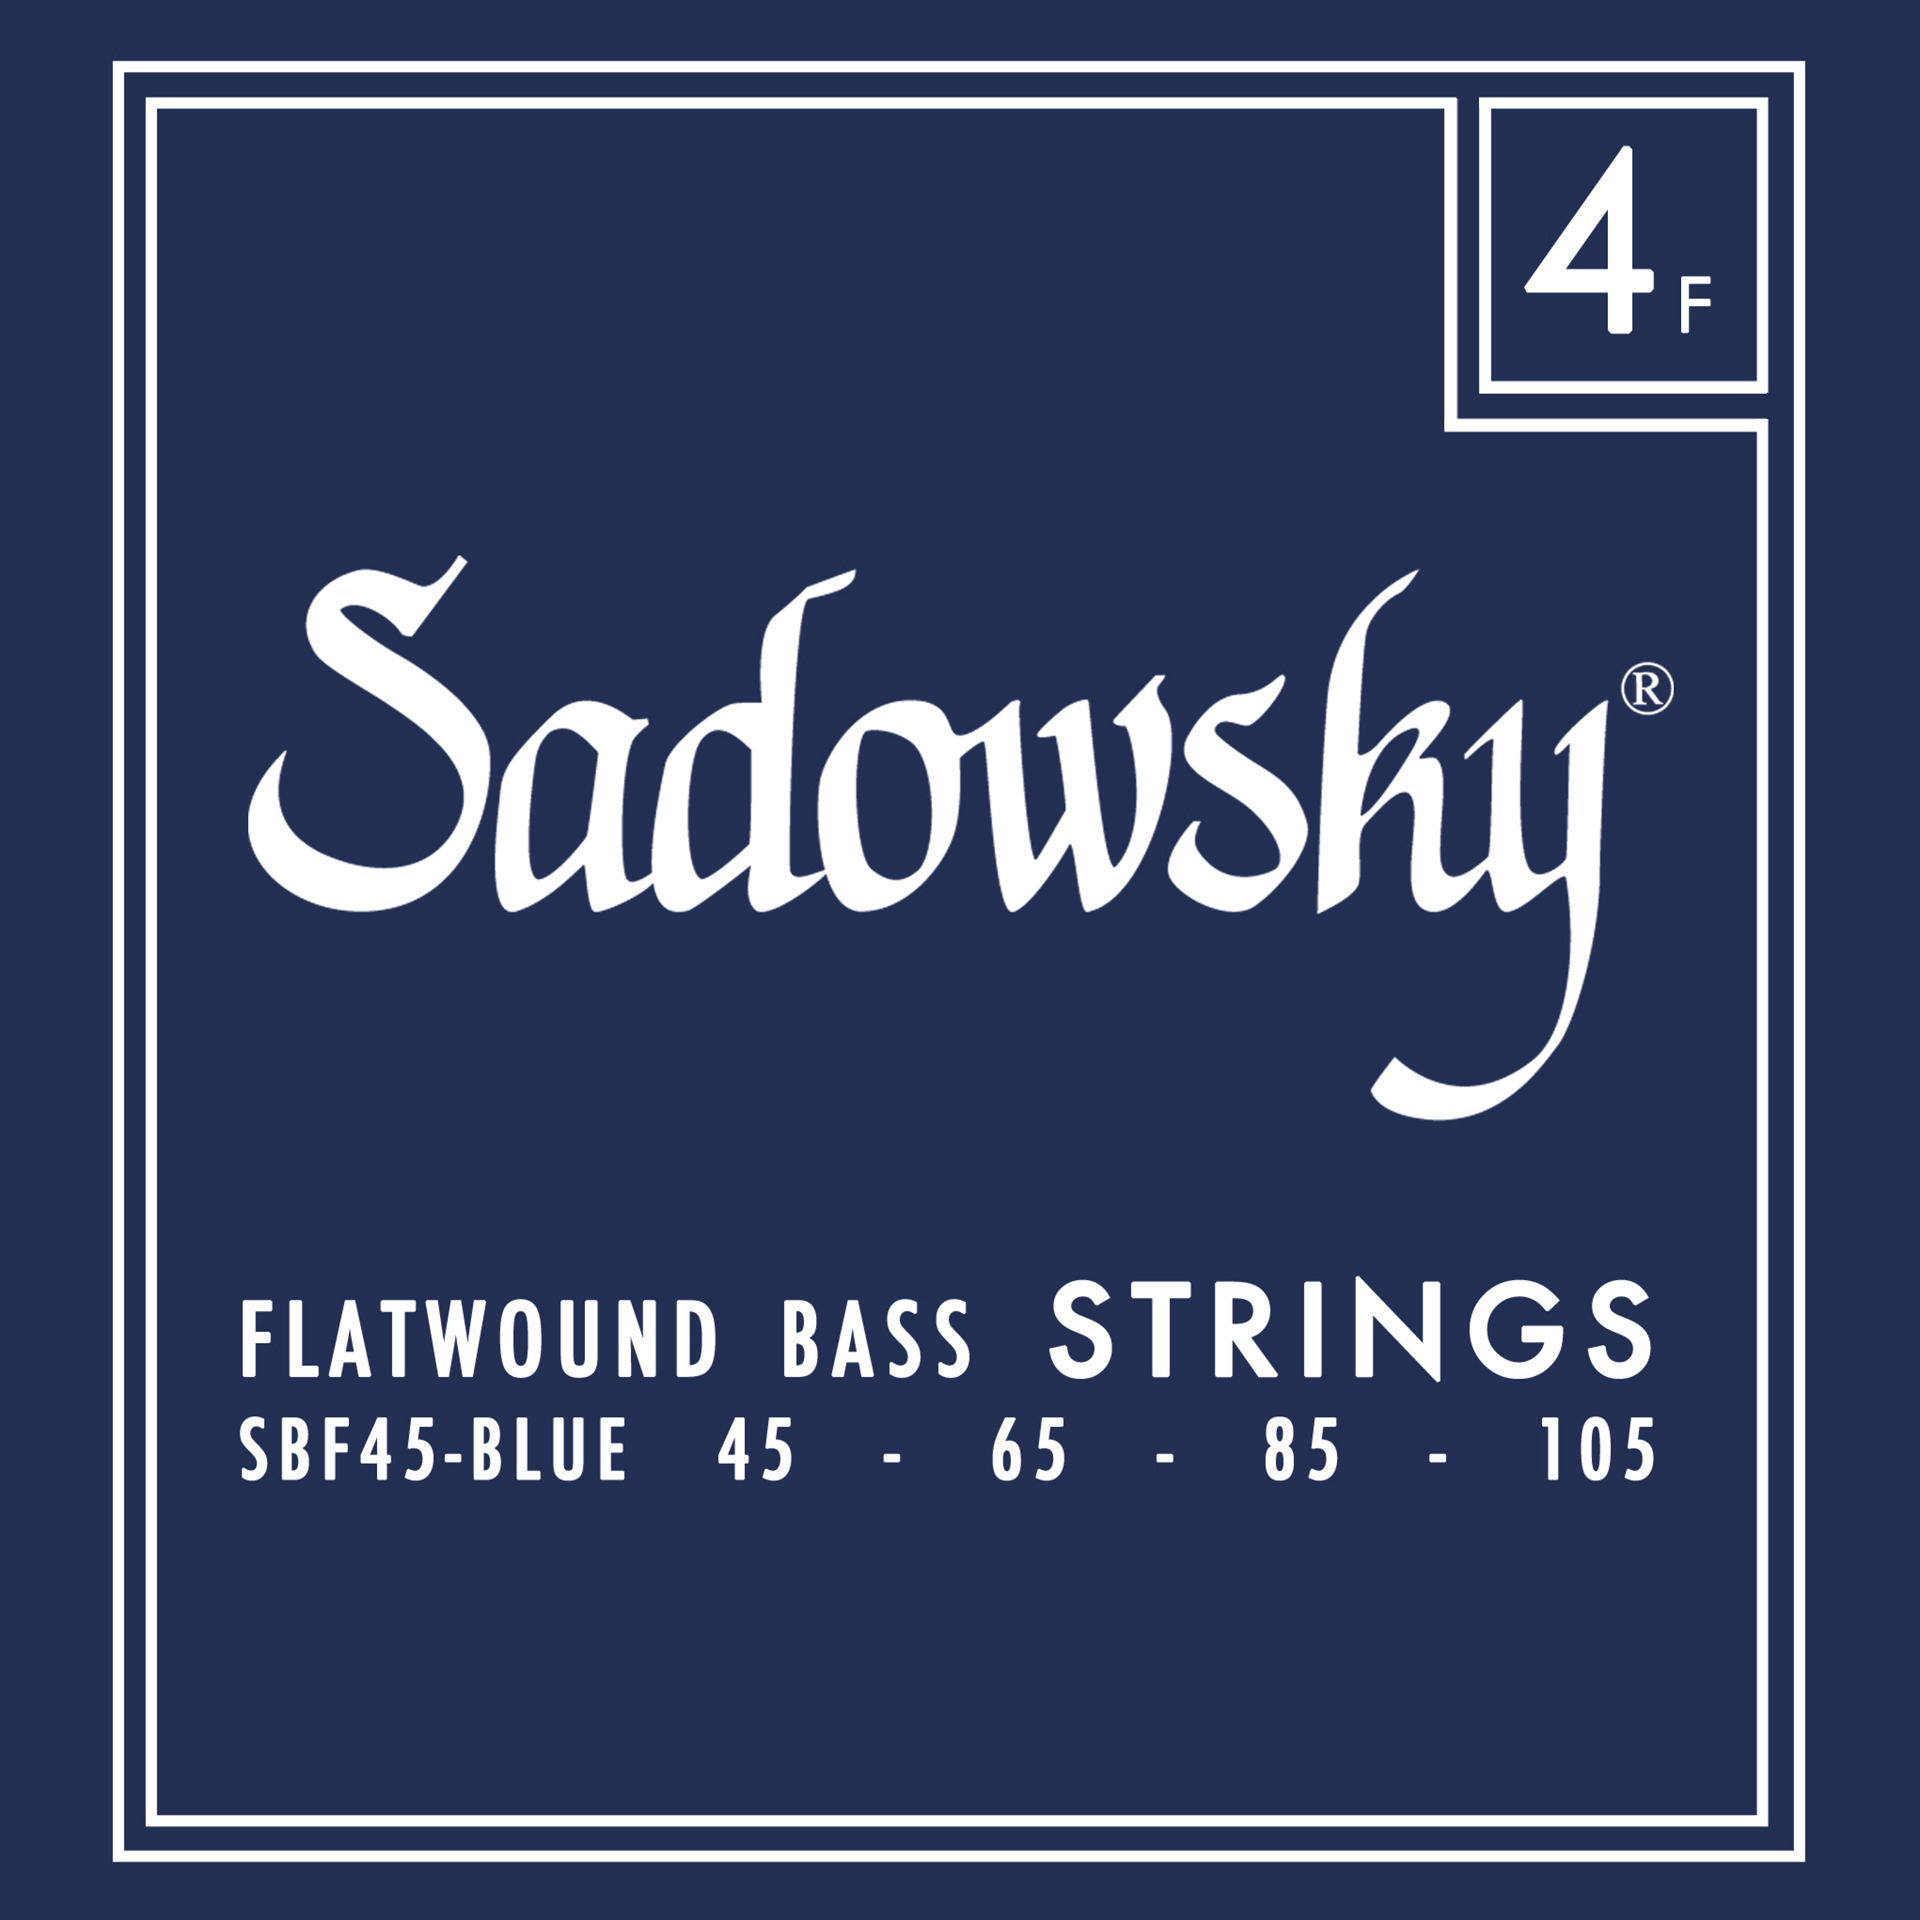 Sadowsky Blue Label Bass String Set, Stainless Steel, Flatwound - 4-String, 045-105